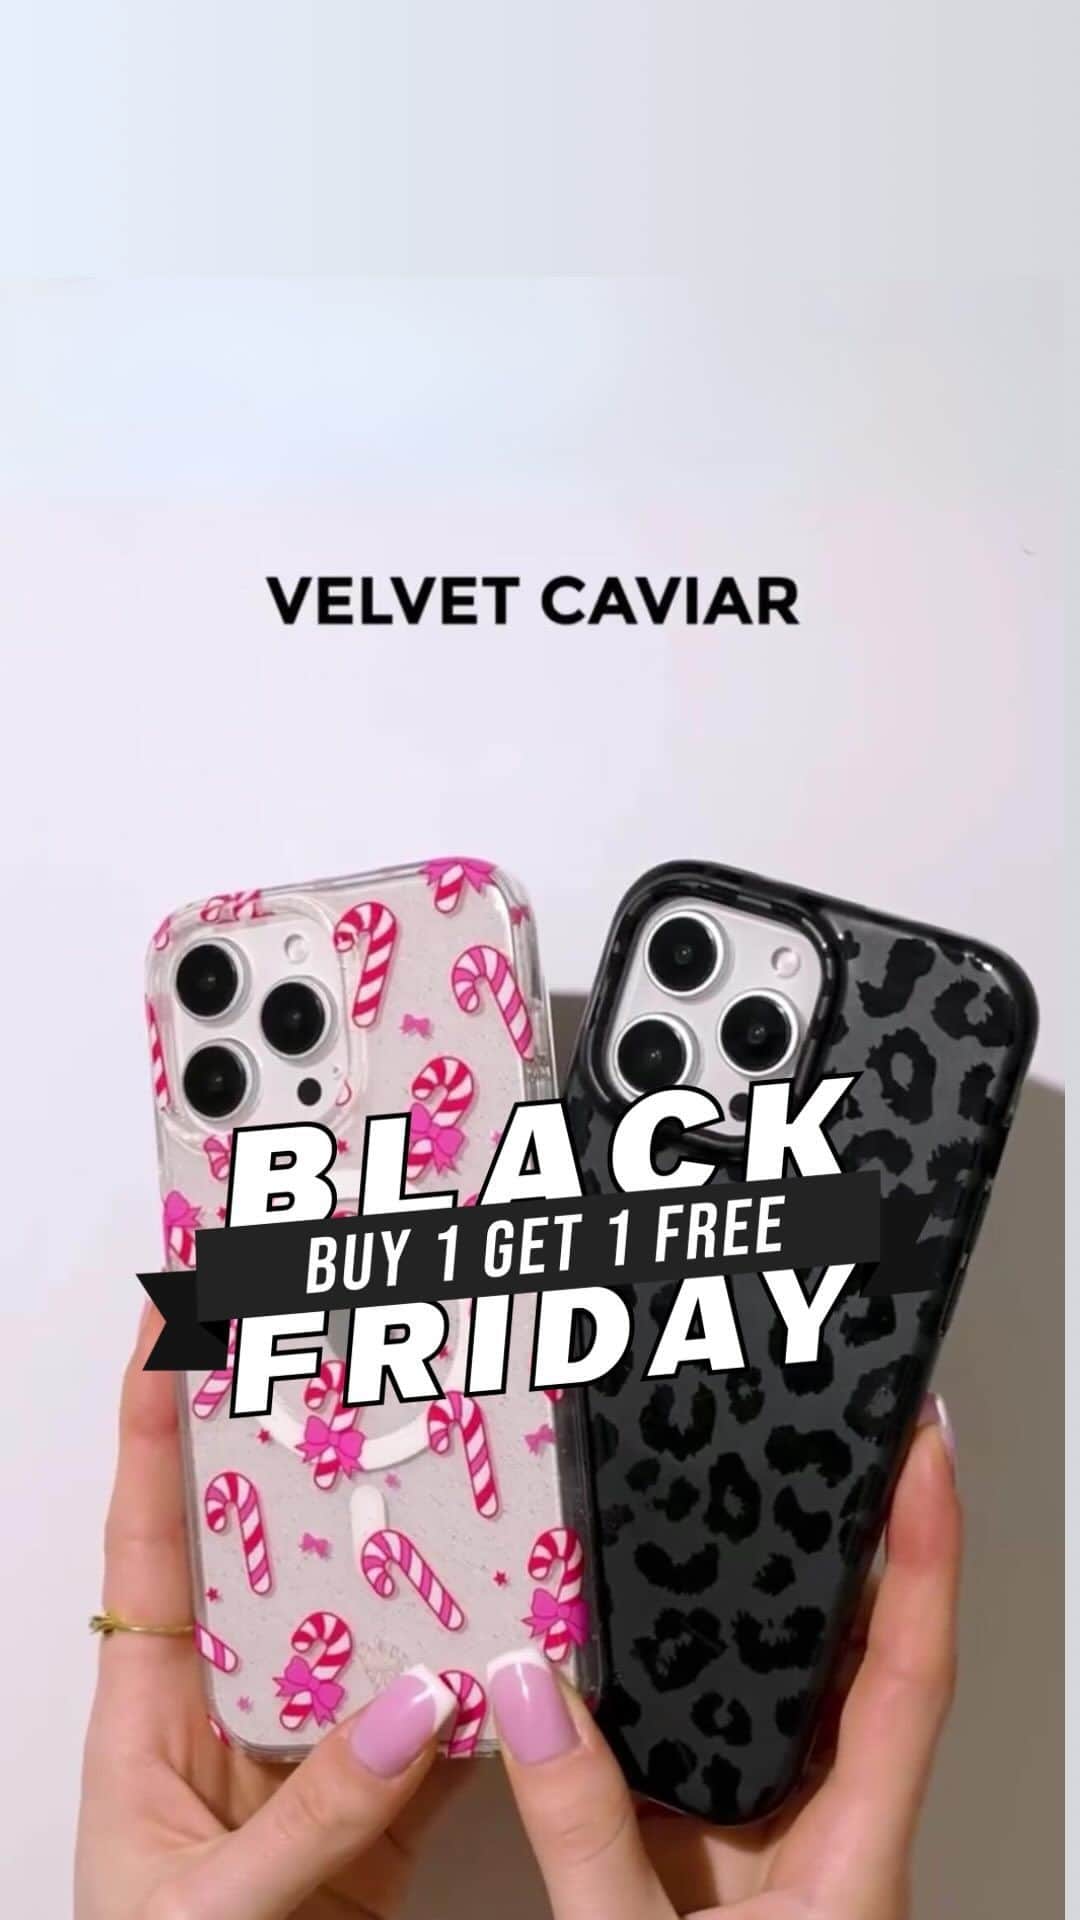 VELVETCAVIARのインスタグラム：「🚨 BLACK FRIDAY BOGO is LIVE! 🚨 Buy 1 Get 1 FREE on Absolutely Every Style! That’s 2 for the price of 1, Our Best Deal Ever! (Get a head start today, popular styles sell out fast.😉🖤).  Wait, there’s MORE ✨ Orders $80+ will receive a FREE Limited Edition Makeup Bag, while supplies last!  This deal is for ANY Phone Case and MagSafe Battery Pack, ✨ It’s our biggest sale of the entire year, don’t miss out>> @velvetcaviar #velvetcaviar #blackfridaysale #blackfriday #giftsforher #iphonecases #phonecaseshop #iphone15」